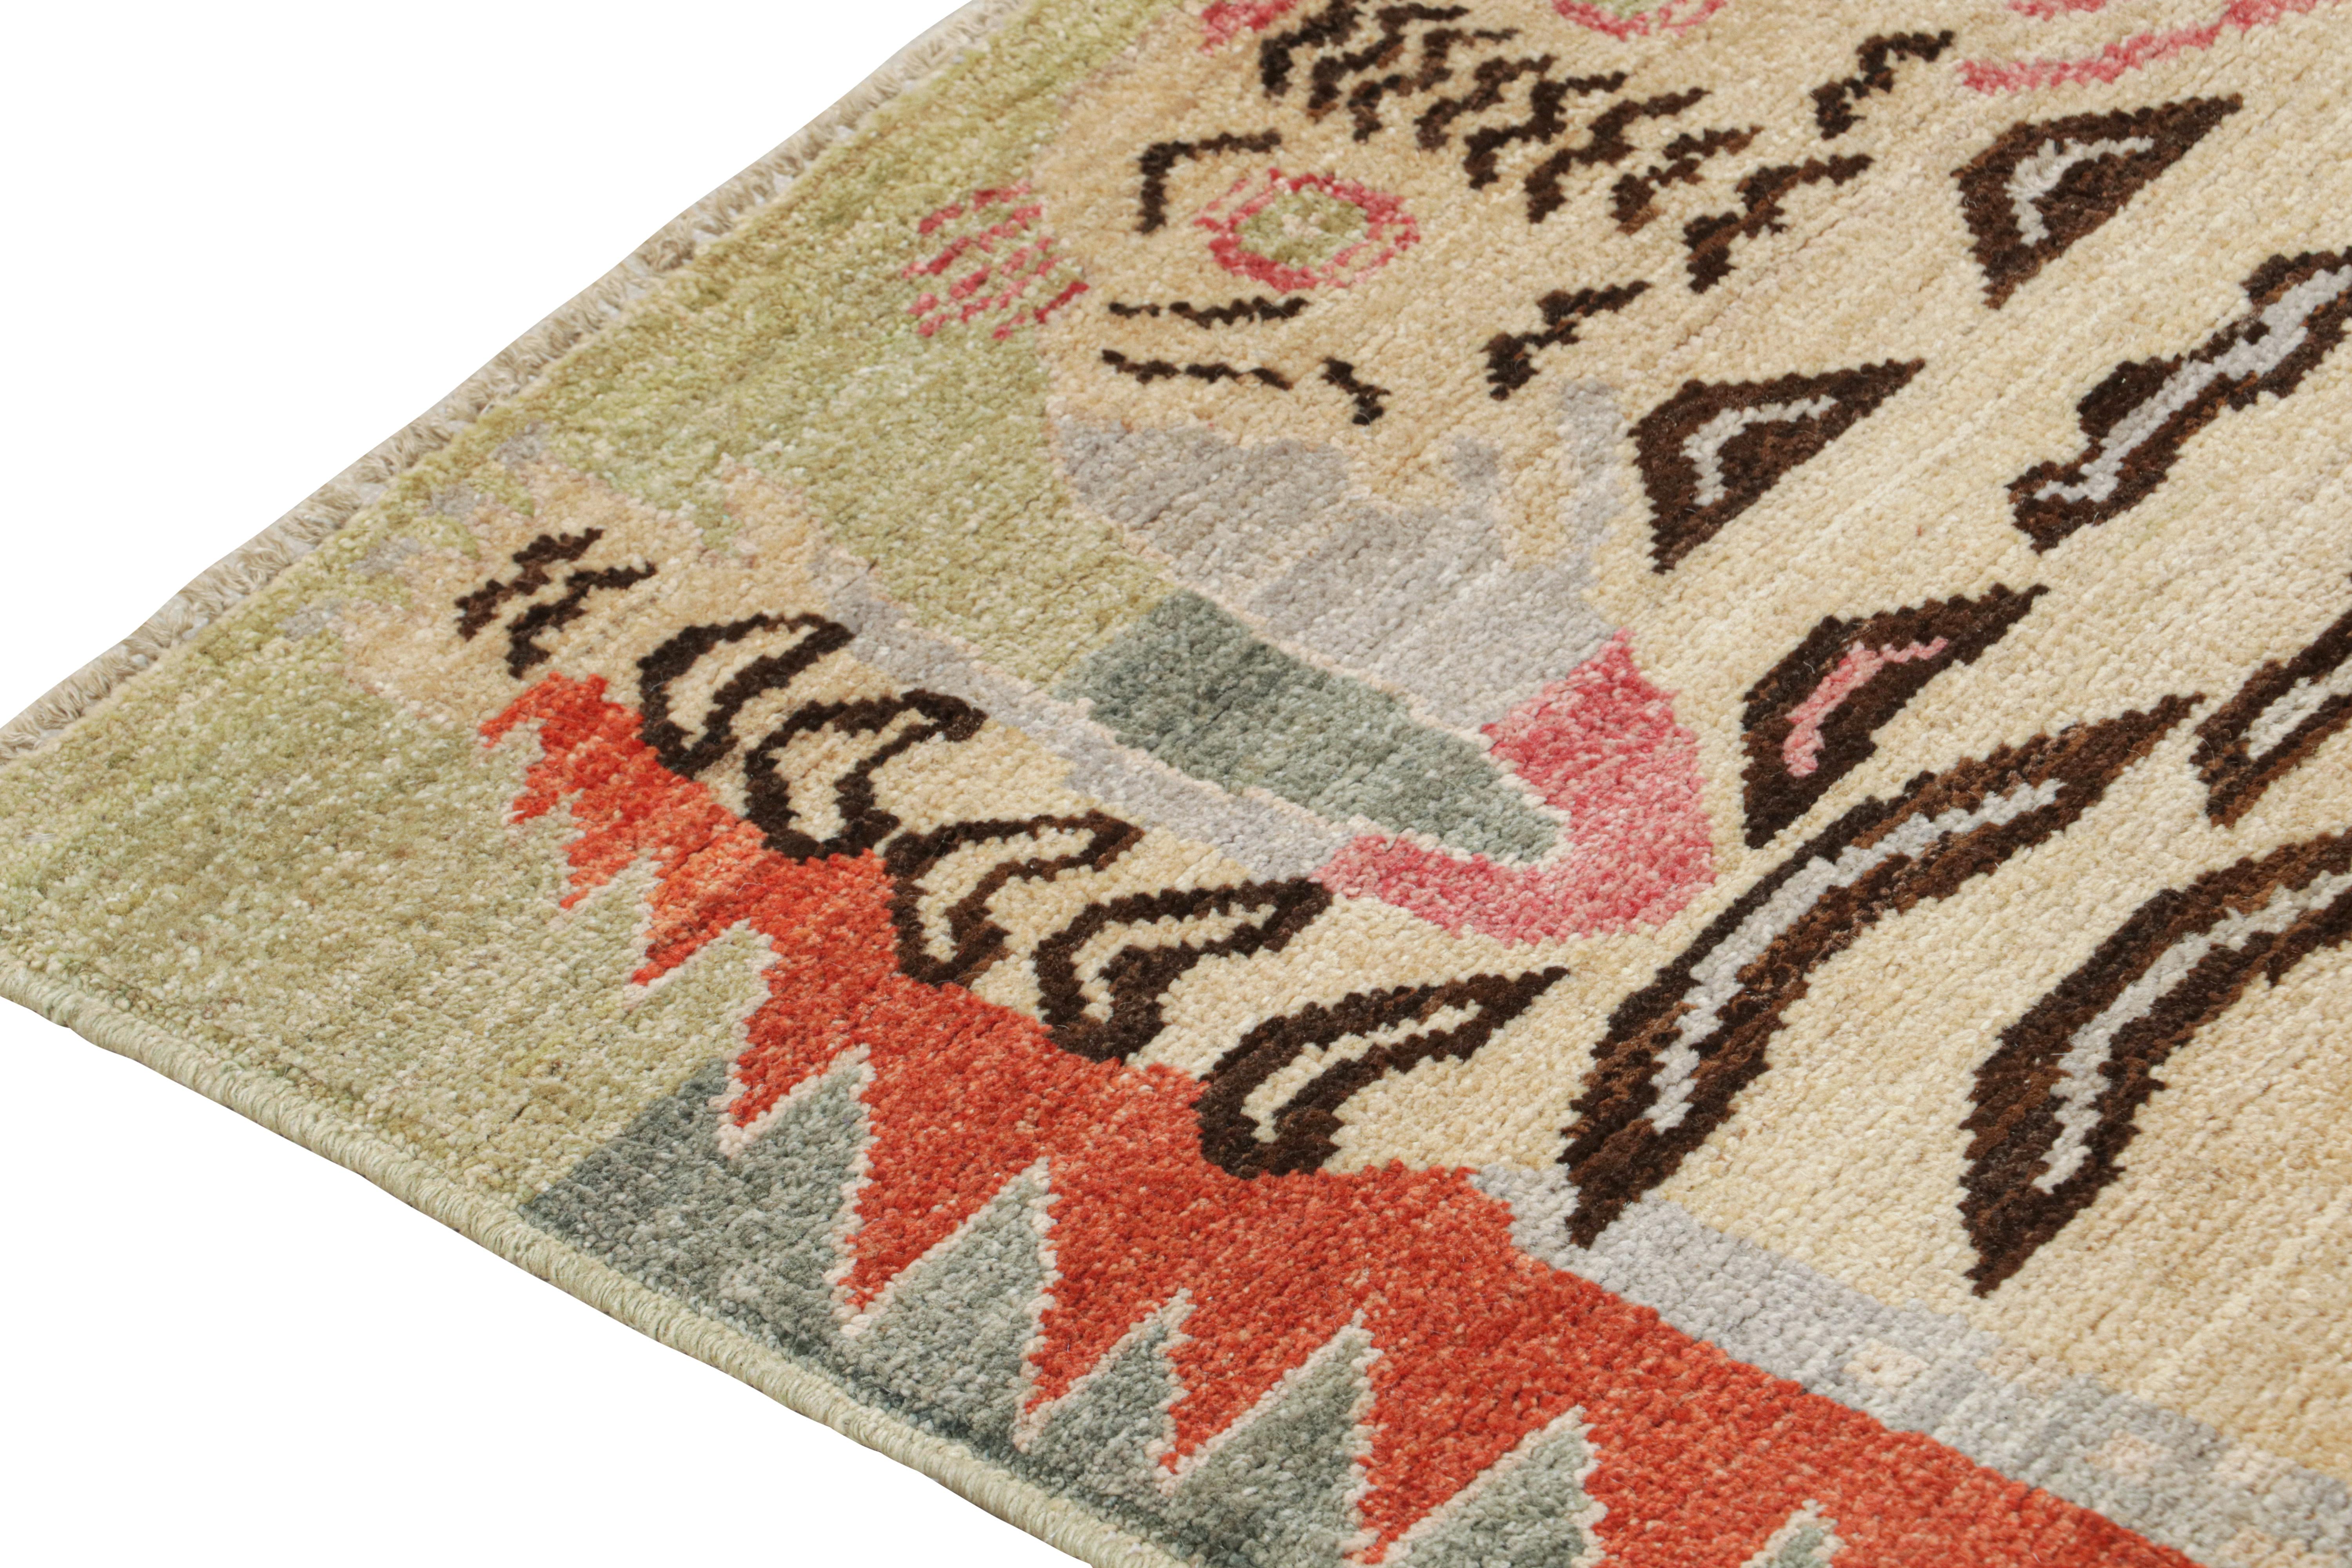 Pakistani Rug & Kilim’s Classic Style Tiger-Skin Runner in Beige with Geometric Pictorial For Sale